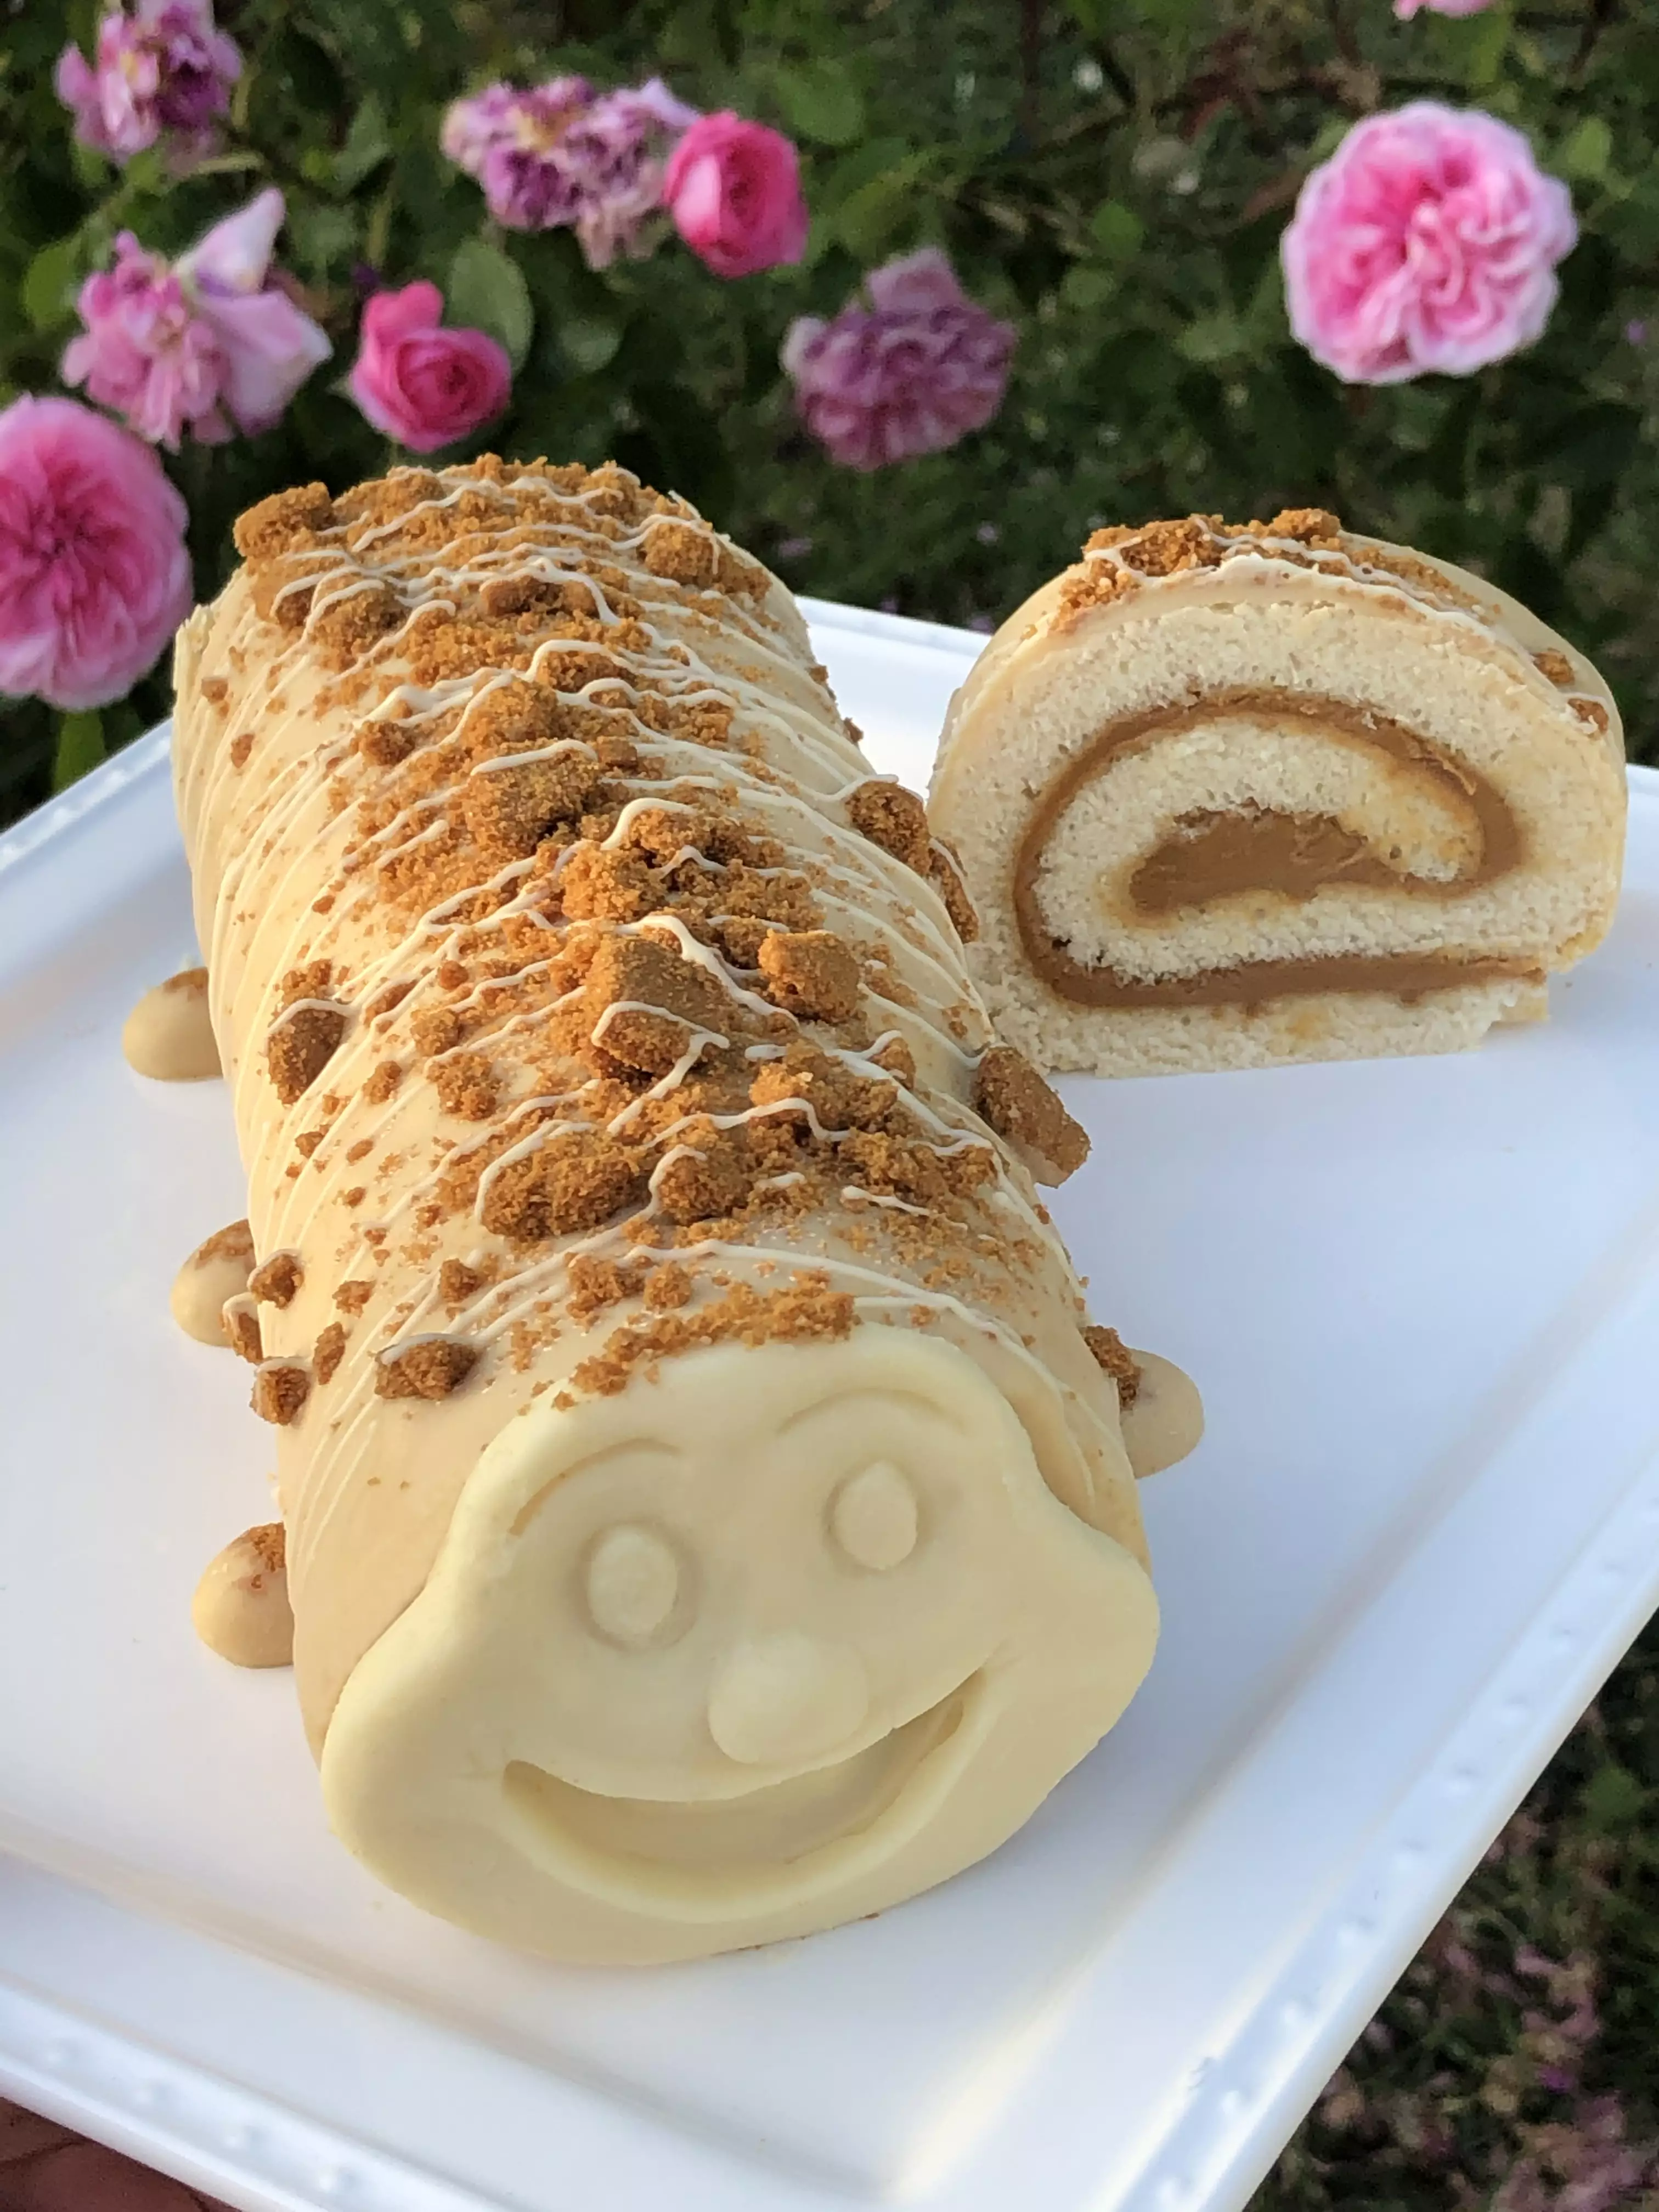 The Biscoff caterpillar looks too cute to eat (